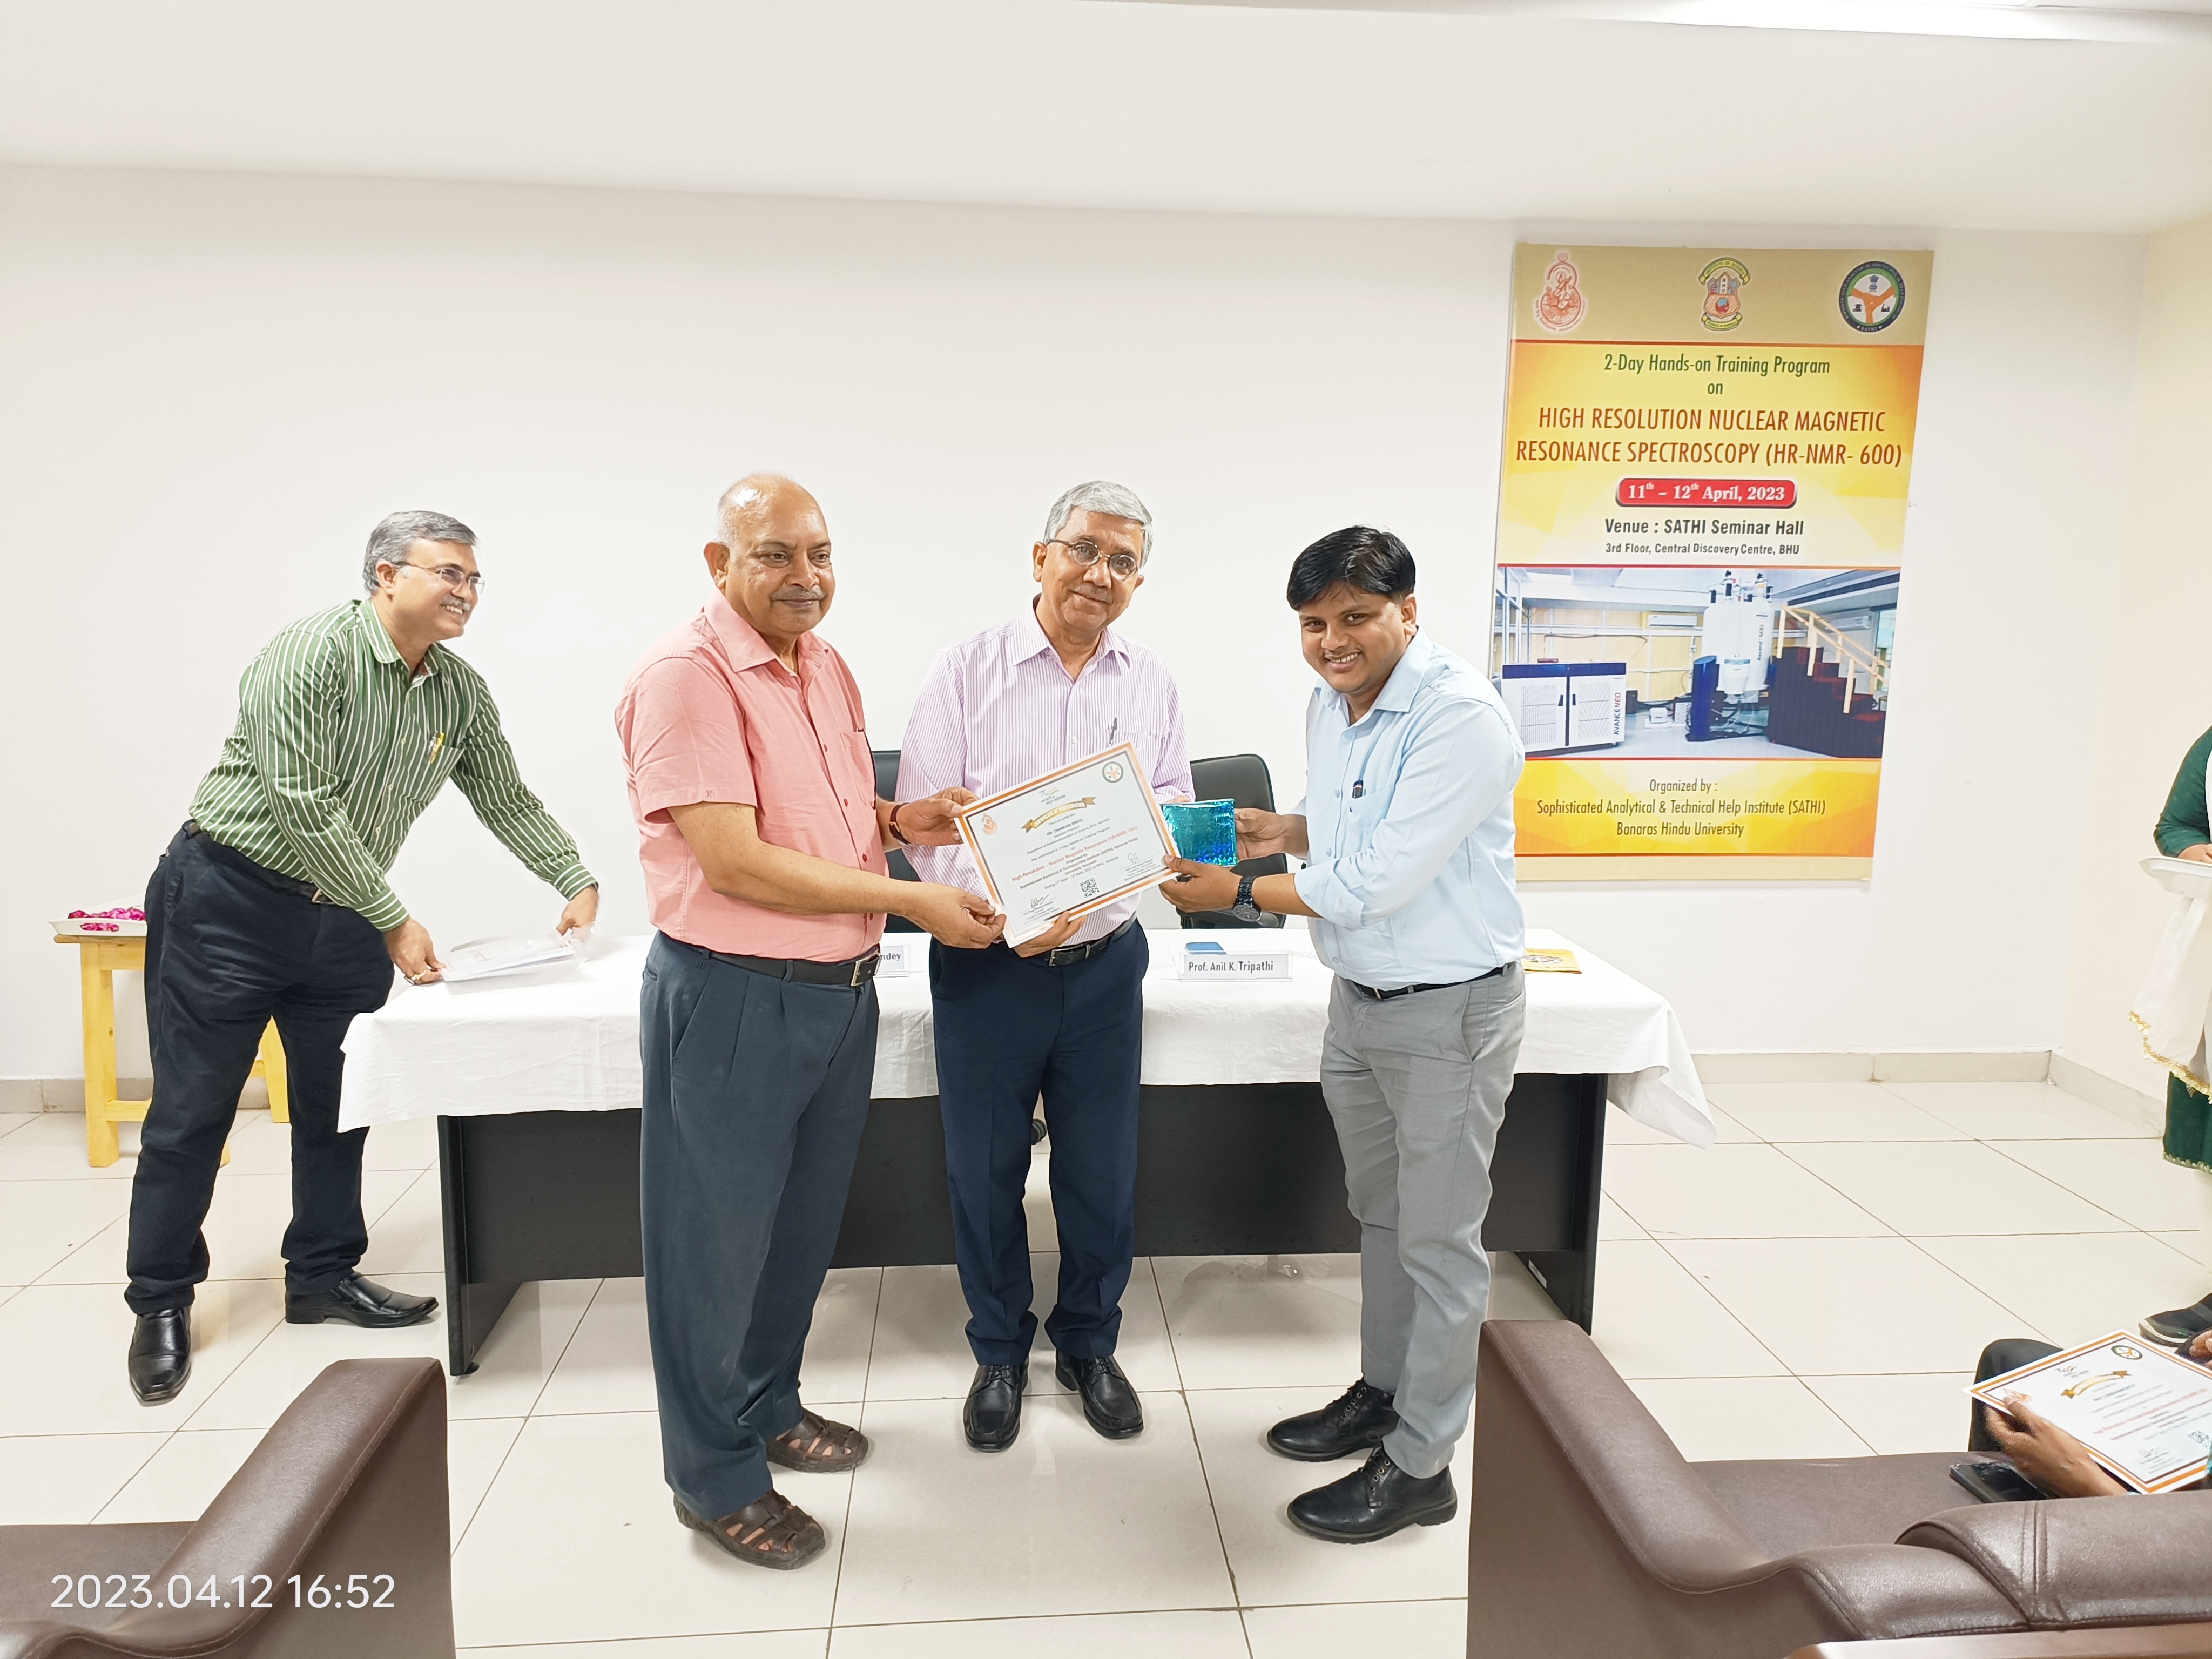 A token memento given to Dr. Chandan Singh for his contribution as a Resource person by Prof. Anil K. Tripathi, Coordinator, SATHI-BHU & Director, ISc, BHU 